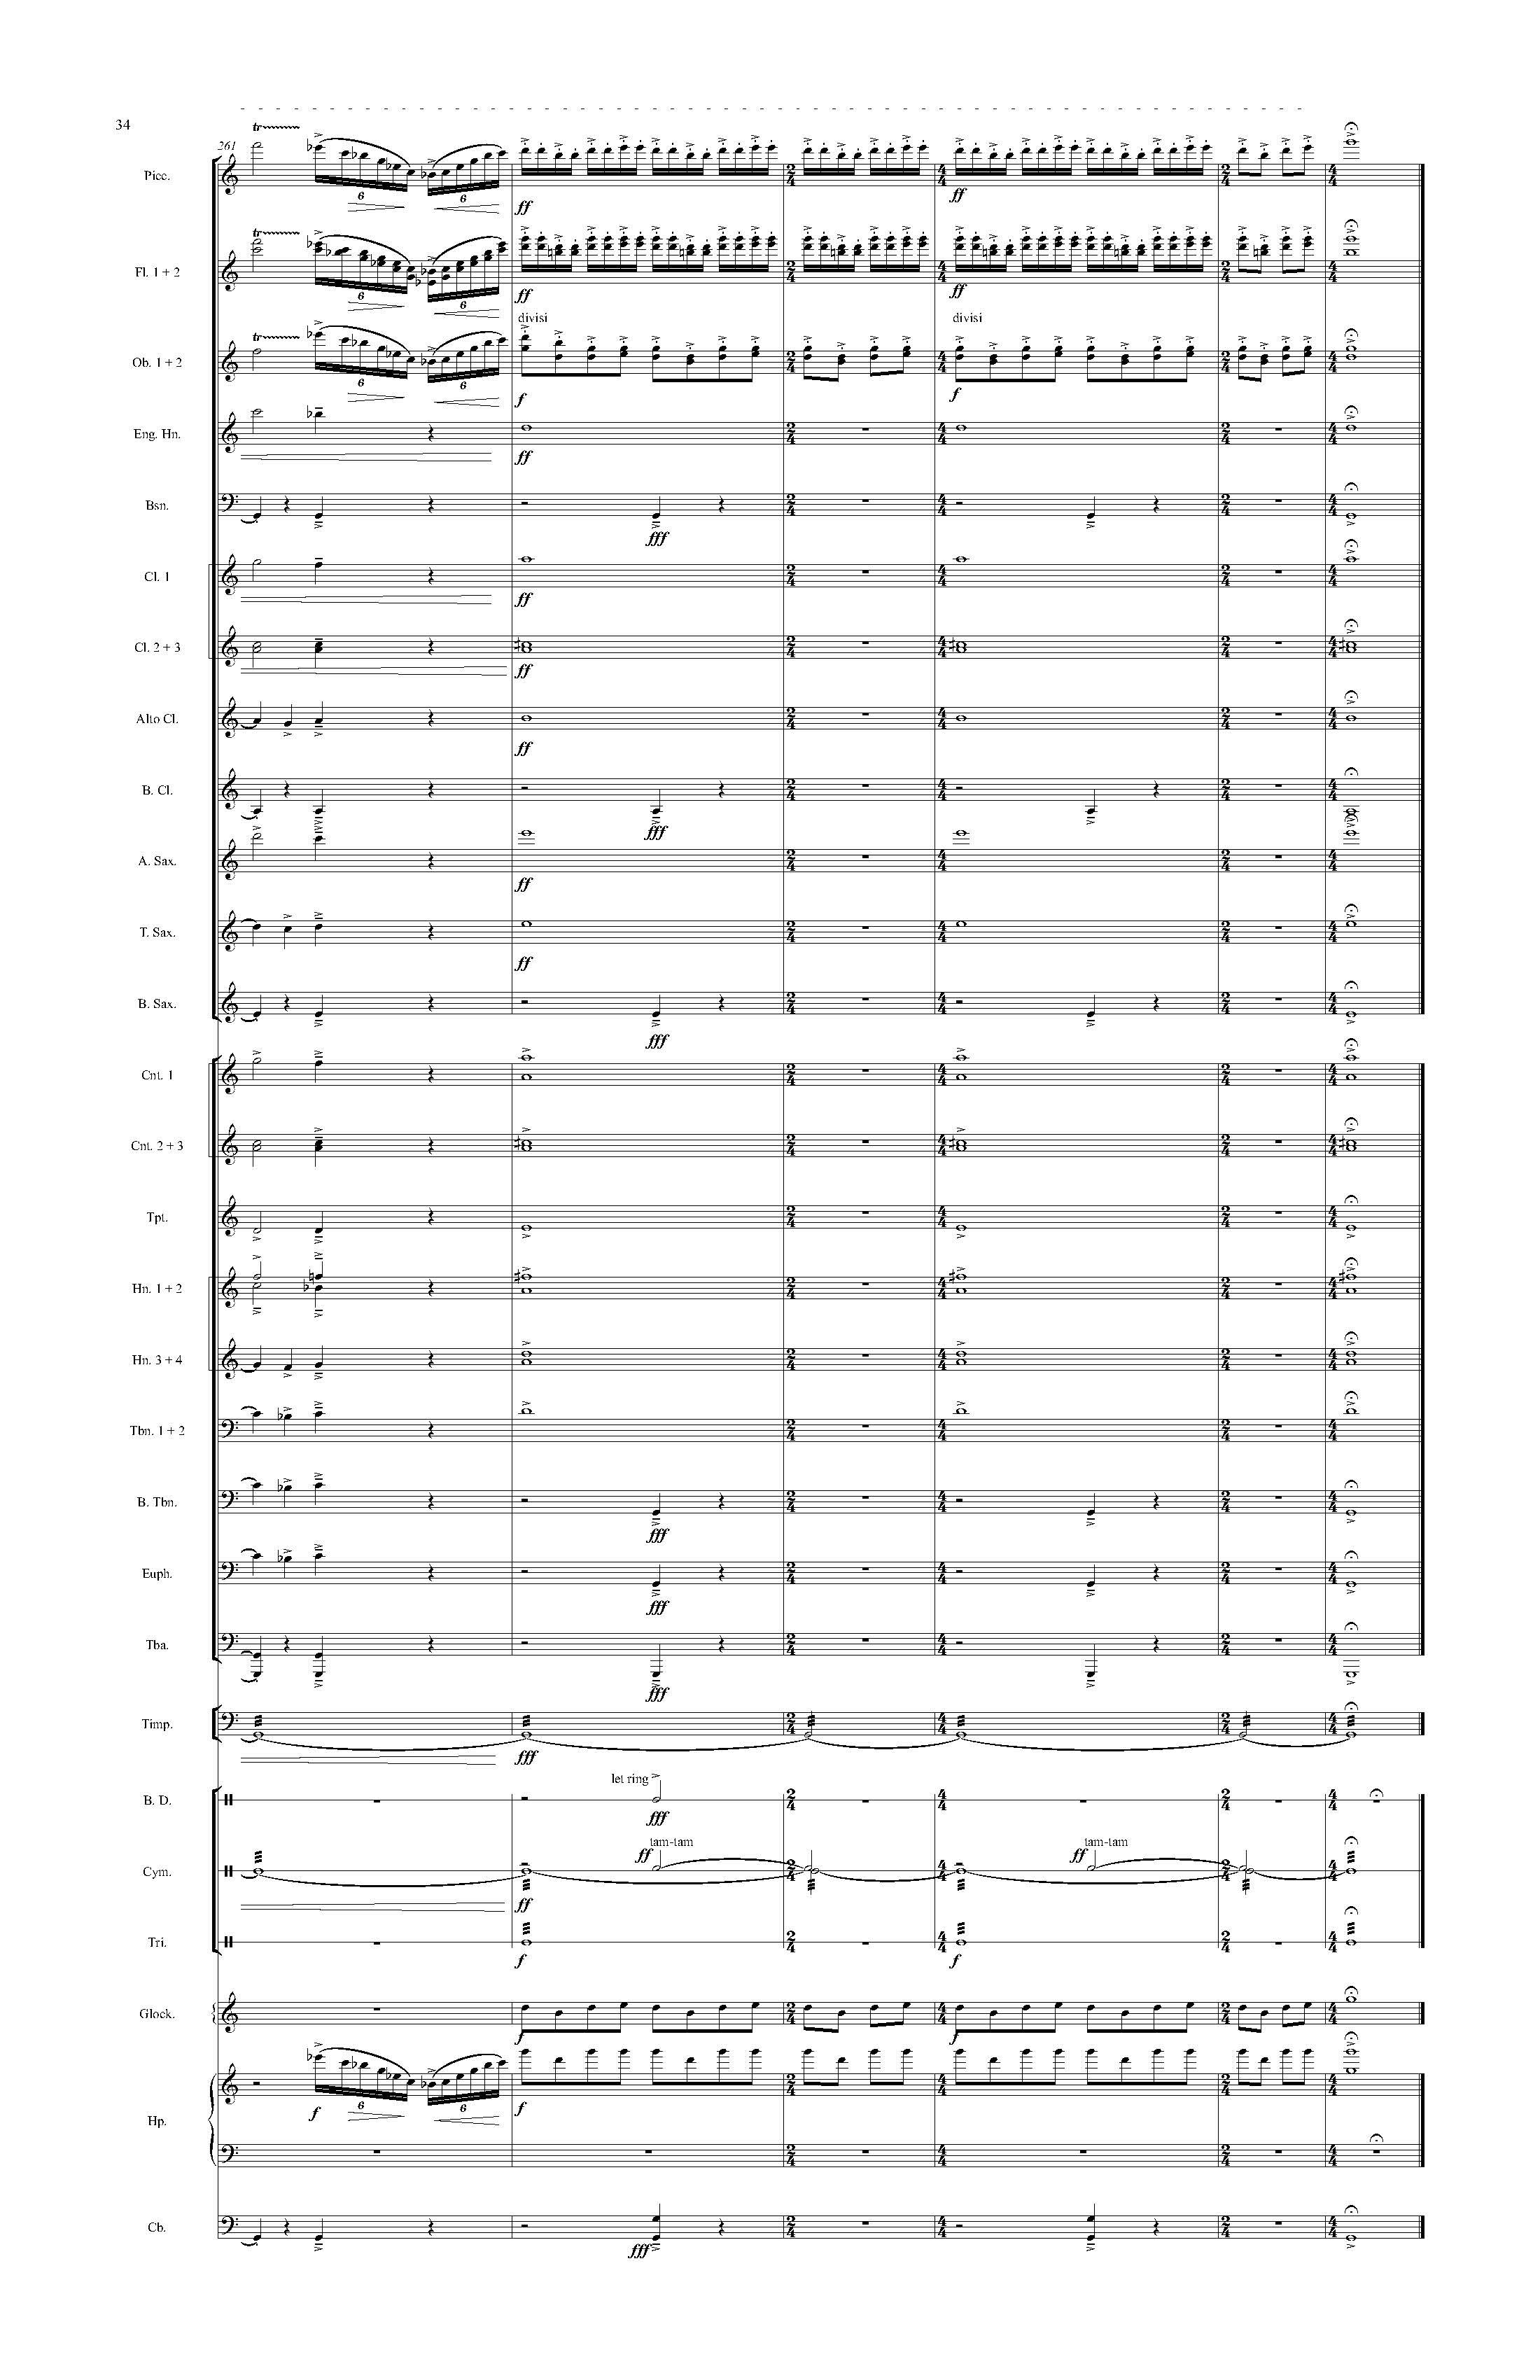 Psyche - Complete Score_Page_40.jpg